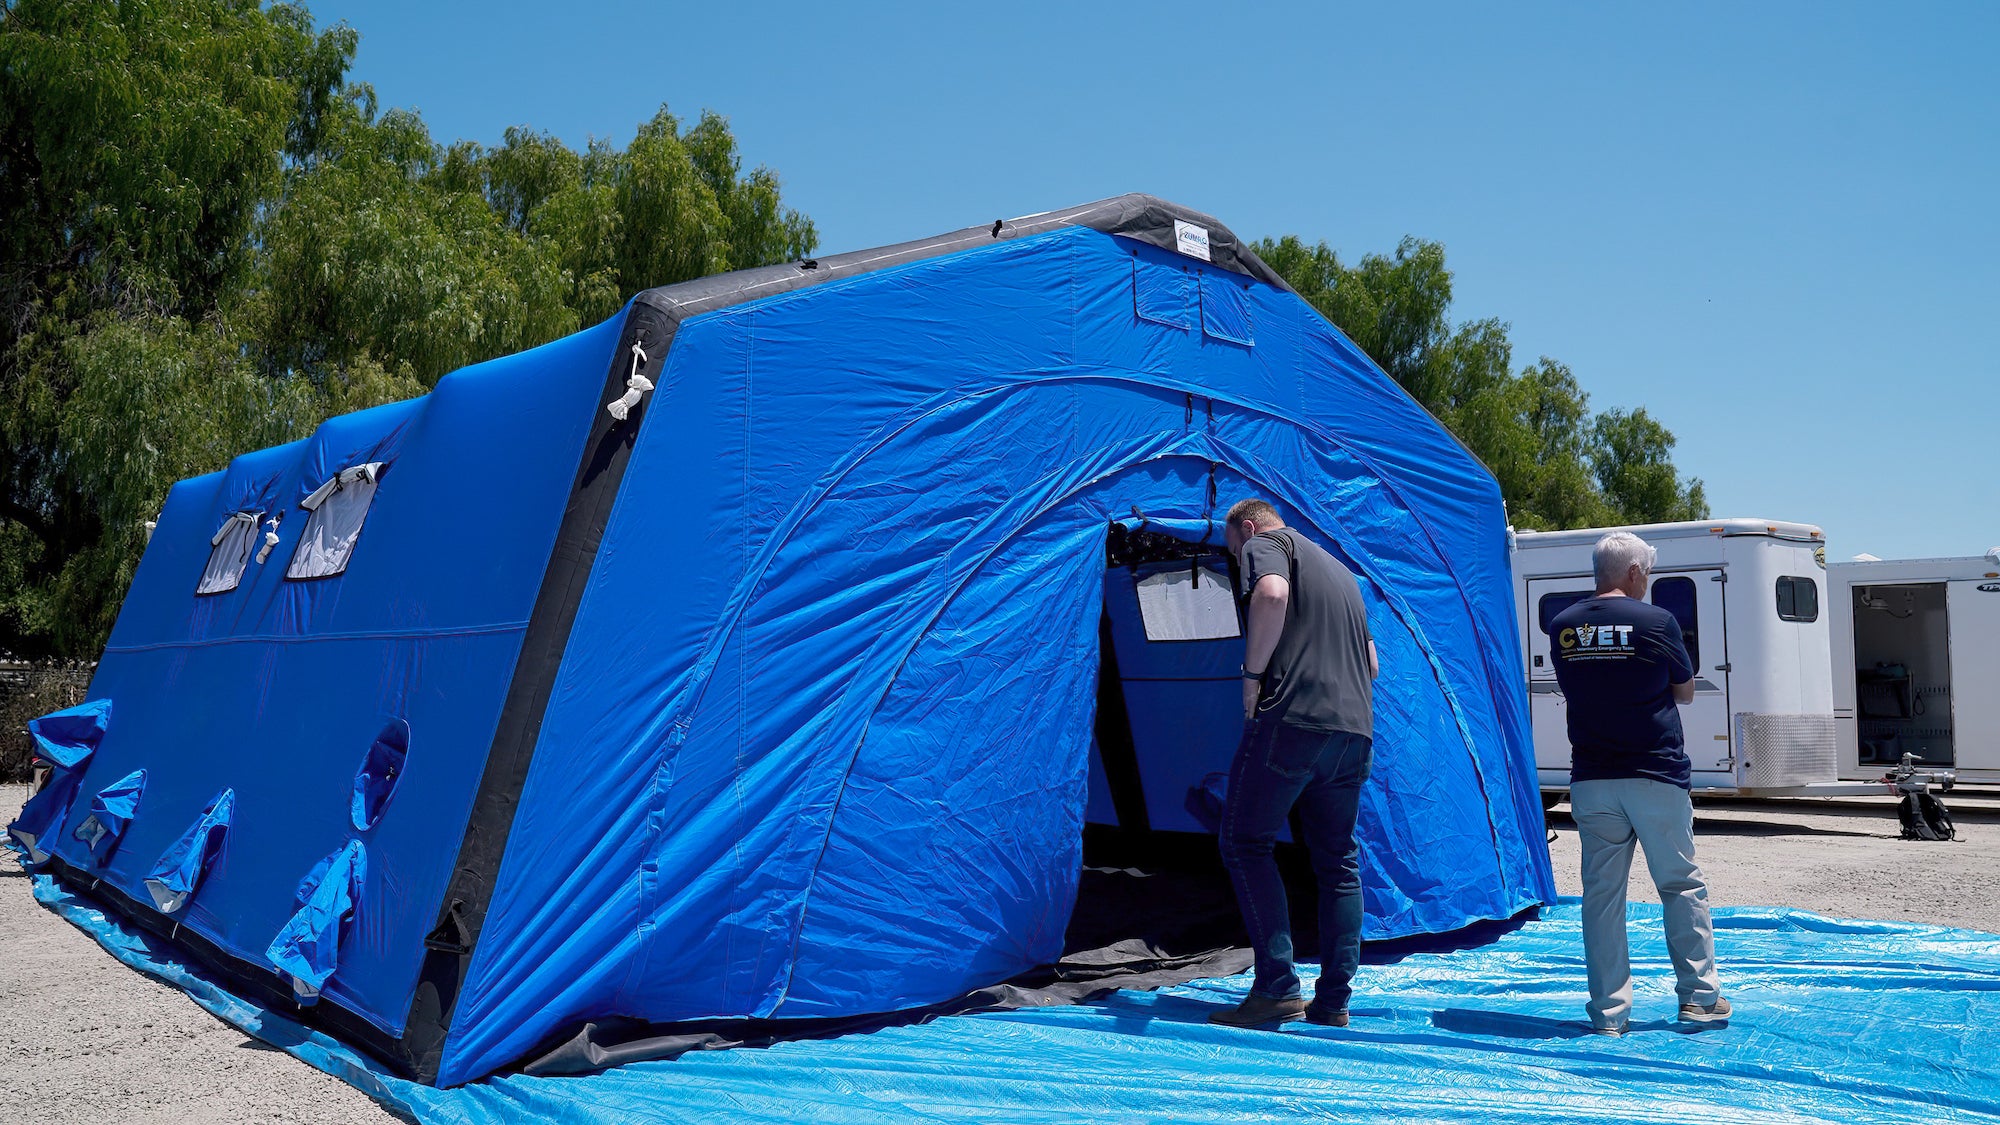 A giant blue tent with a man in front of it